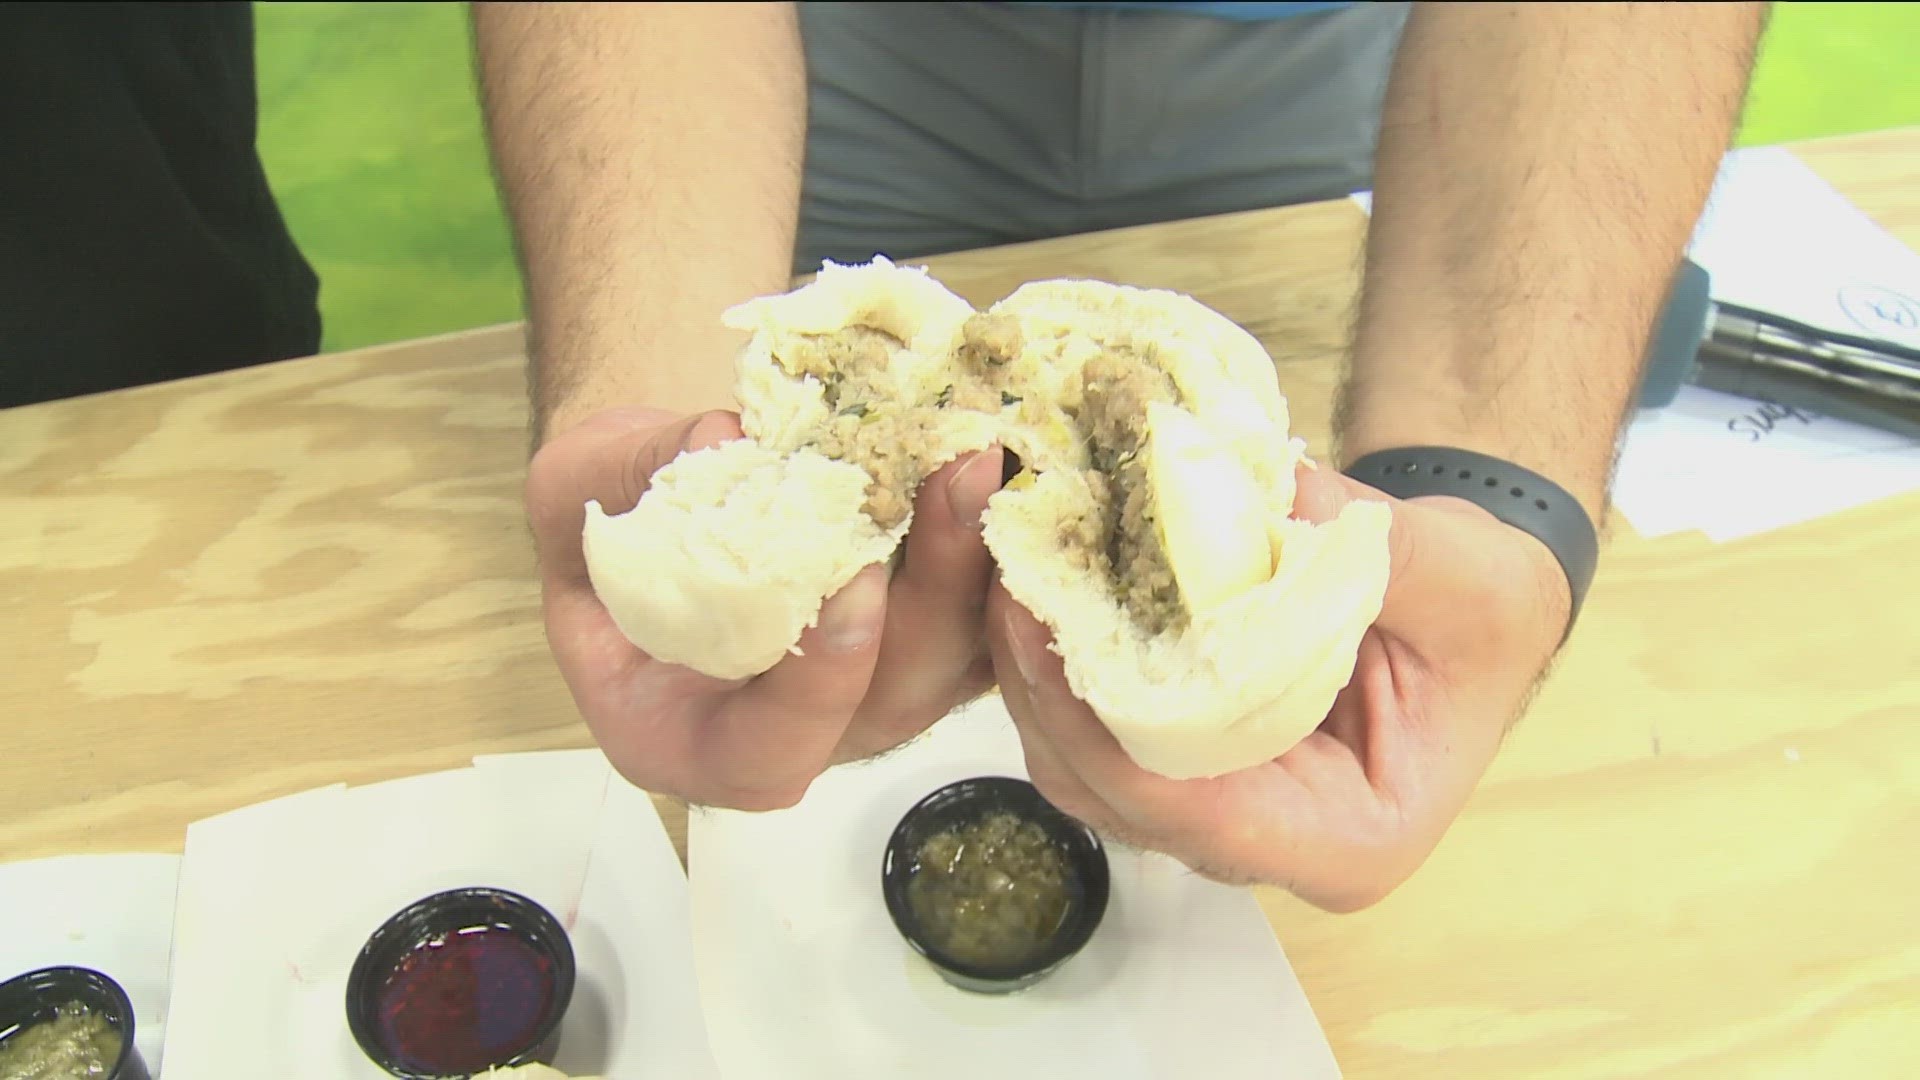 Union Hmong Kitchen brought two new foods to the State Fair this year and Vang stopped by the KARE 11 Barn with samples.